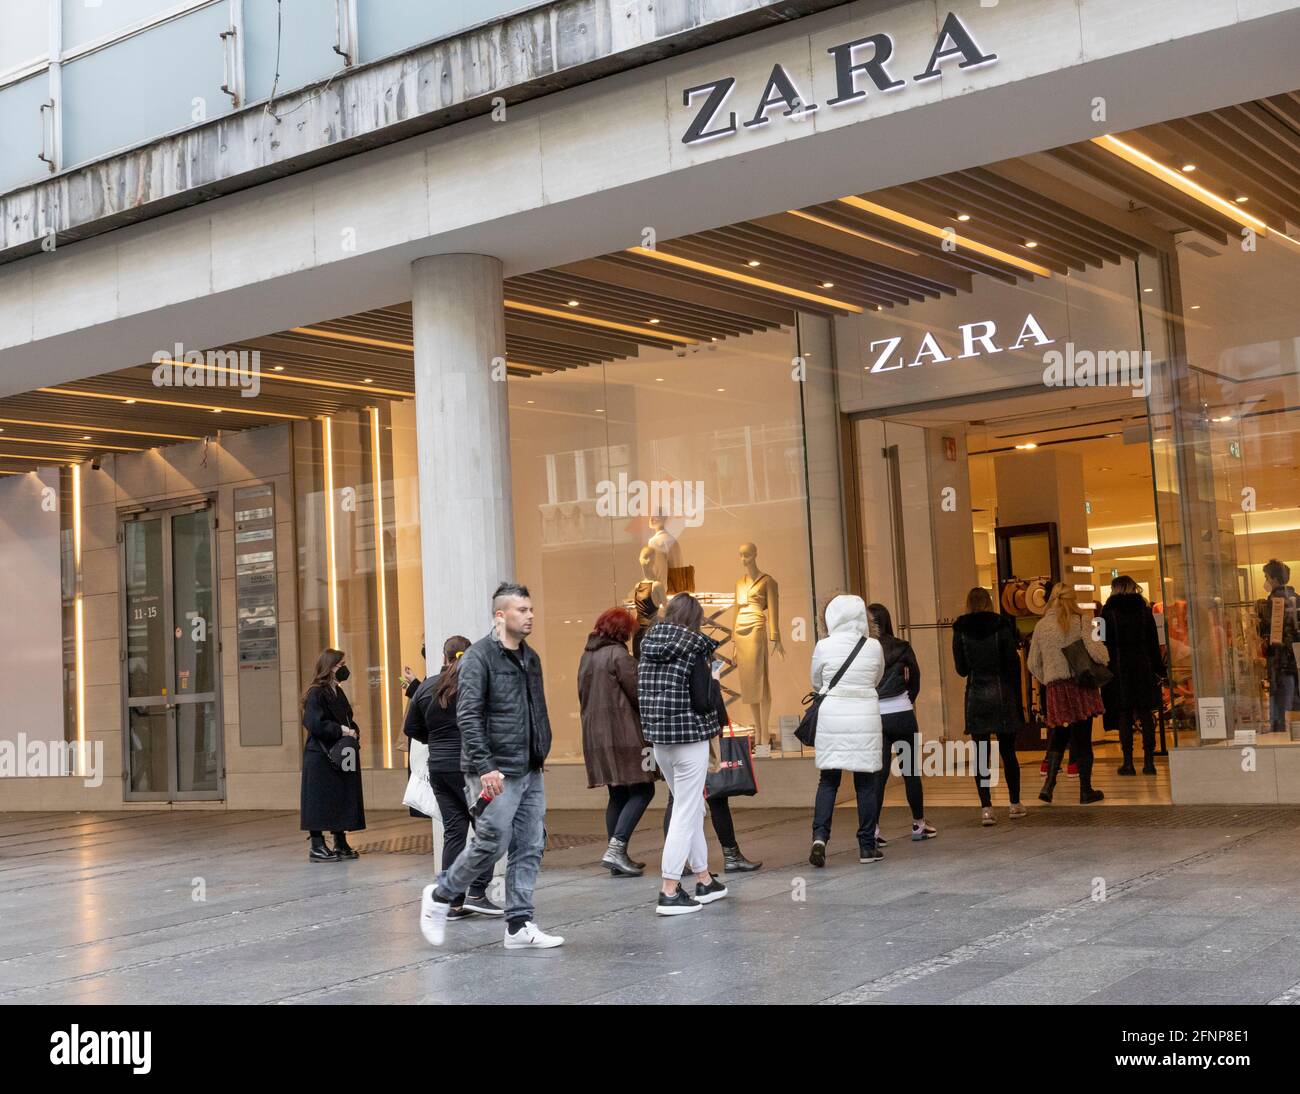 Belgrade, Serbia - March 23, 2021: People waiting in line in frount of Zara  store in Belgrade. Limited number of customers due to coronavirus pandemic  Stock Photo - Alamy